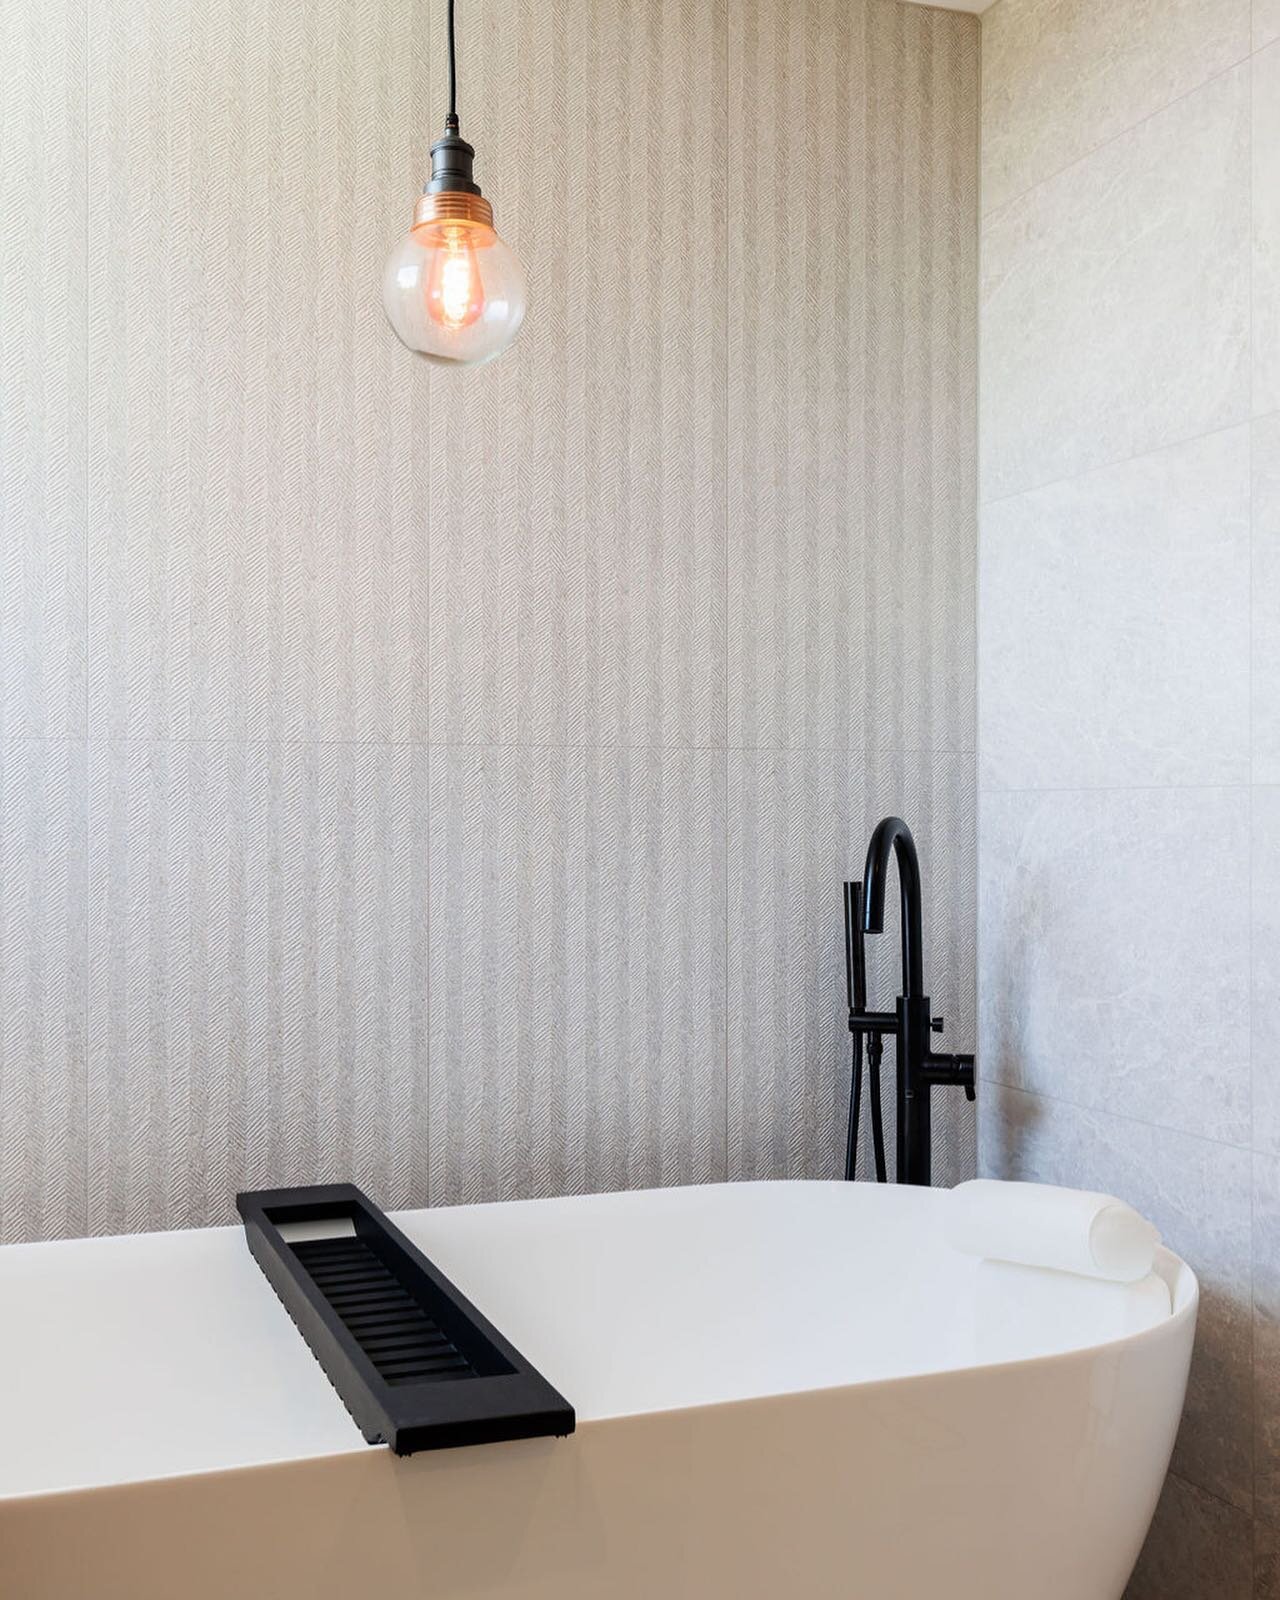 The cool tones of our master en-suite has created a tranquil and calming space at the top of the house. A simplicity of materials, tones and textures. 

#minimalistspace #bathroomdesign #bathrooms #minimalistbathroom #design #architect #architectspoo